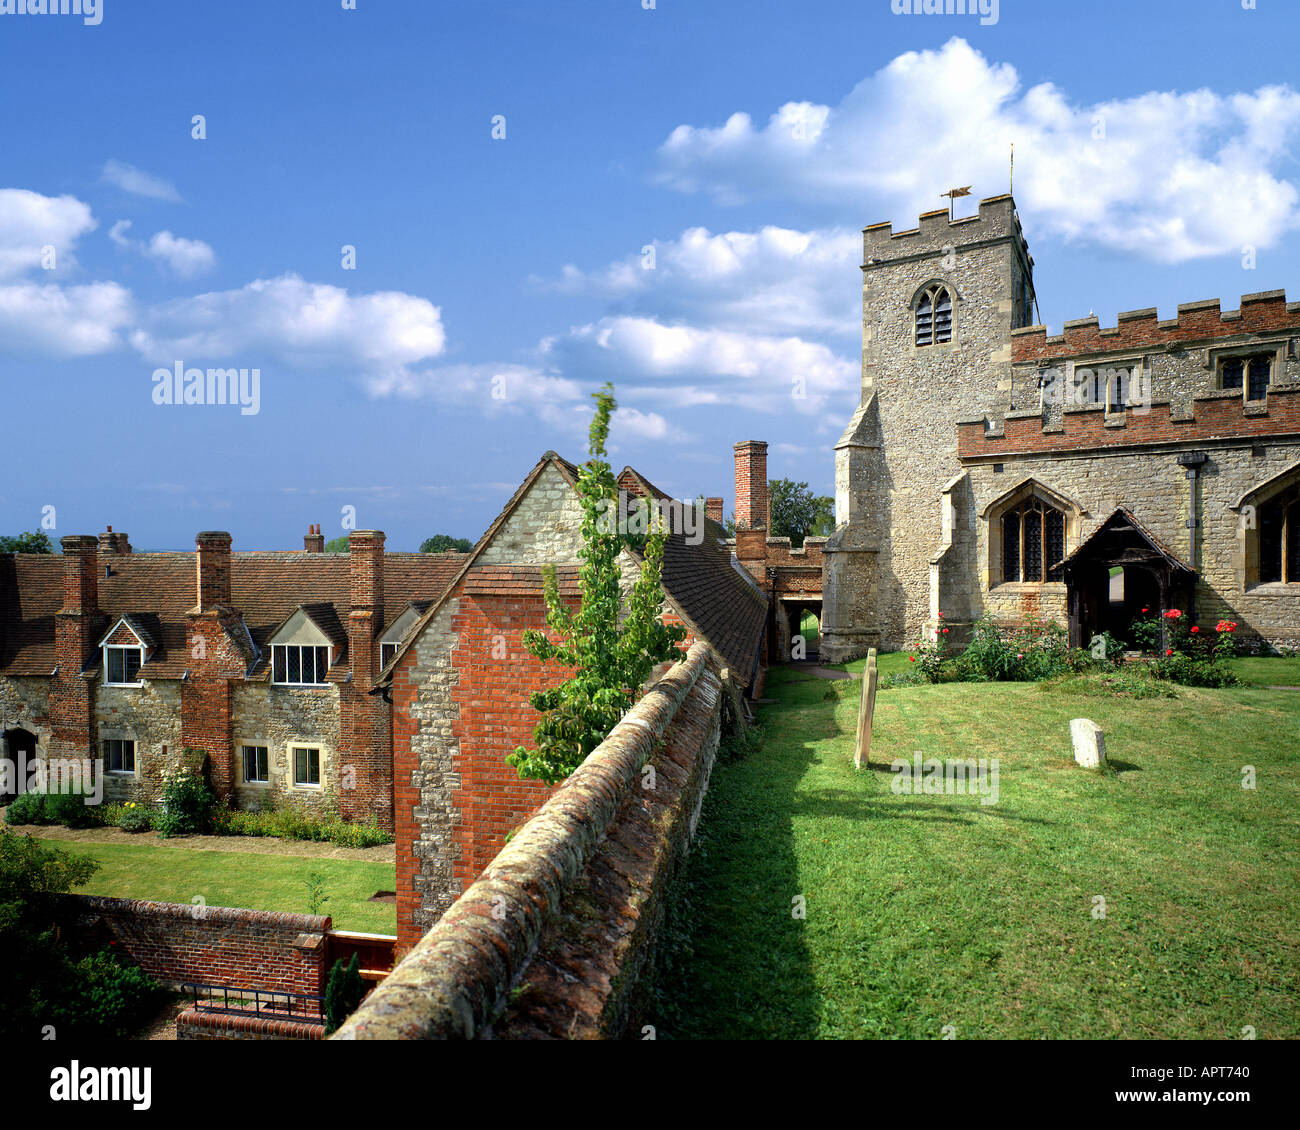 GB - OXFORDSHIRE: St Mary's Church and Almshouses at Ewelme Stock Photo